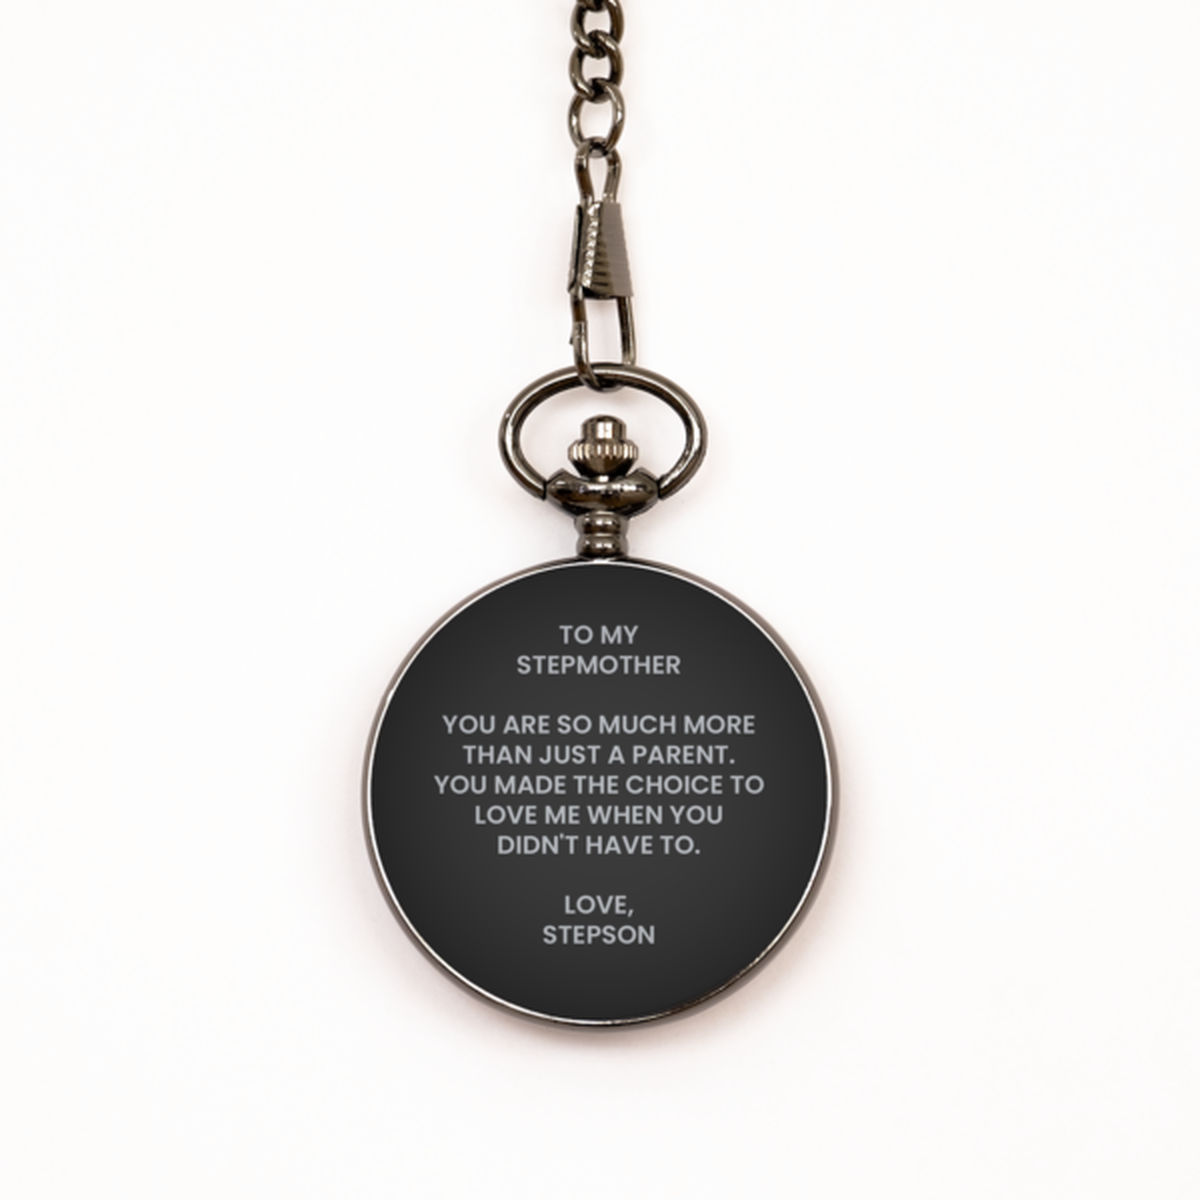 To My Stepmother Black Pocket Watch, Just A Parent, Mothers Day Gifts For Stepmother From Stepson, Birthday Gifts For Women